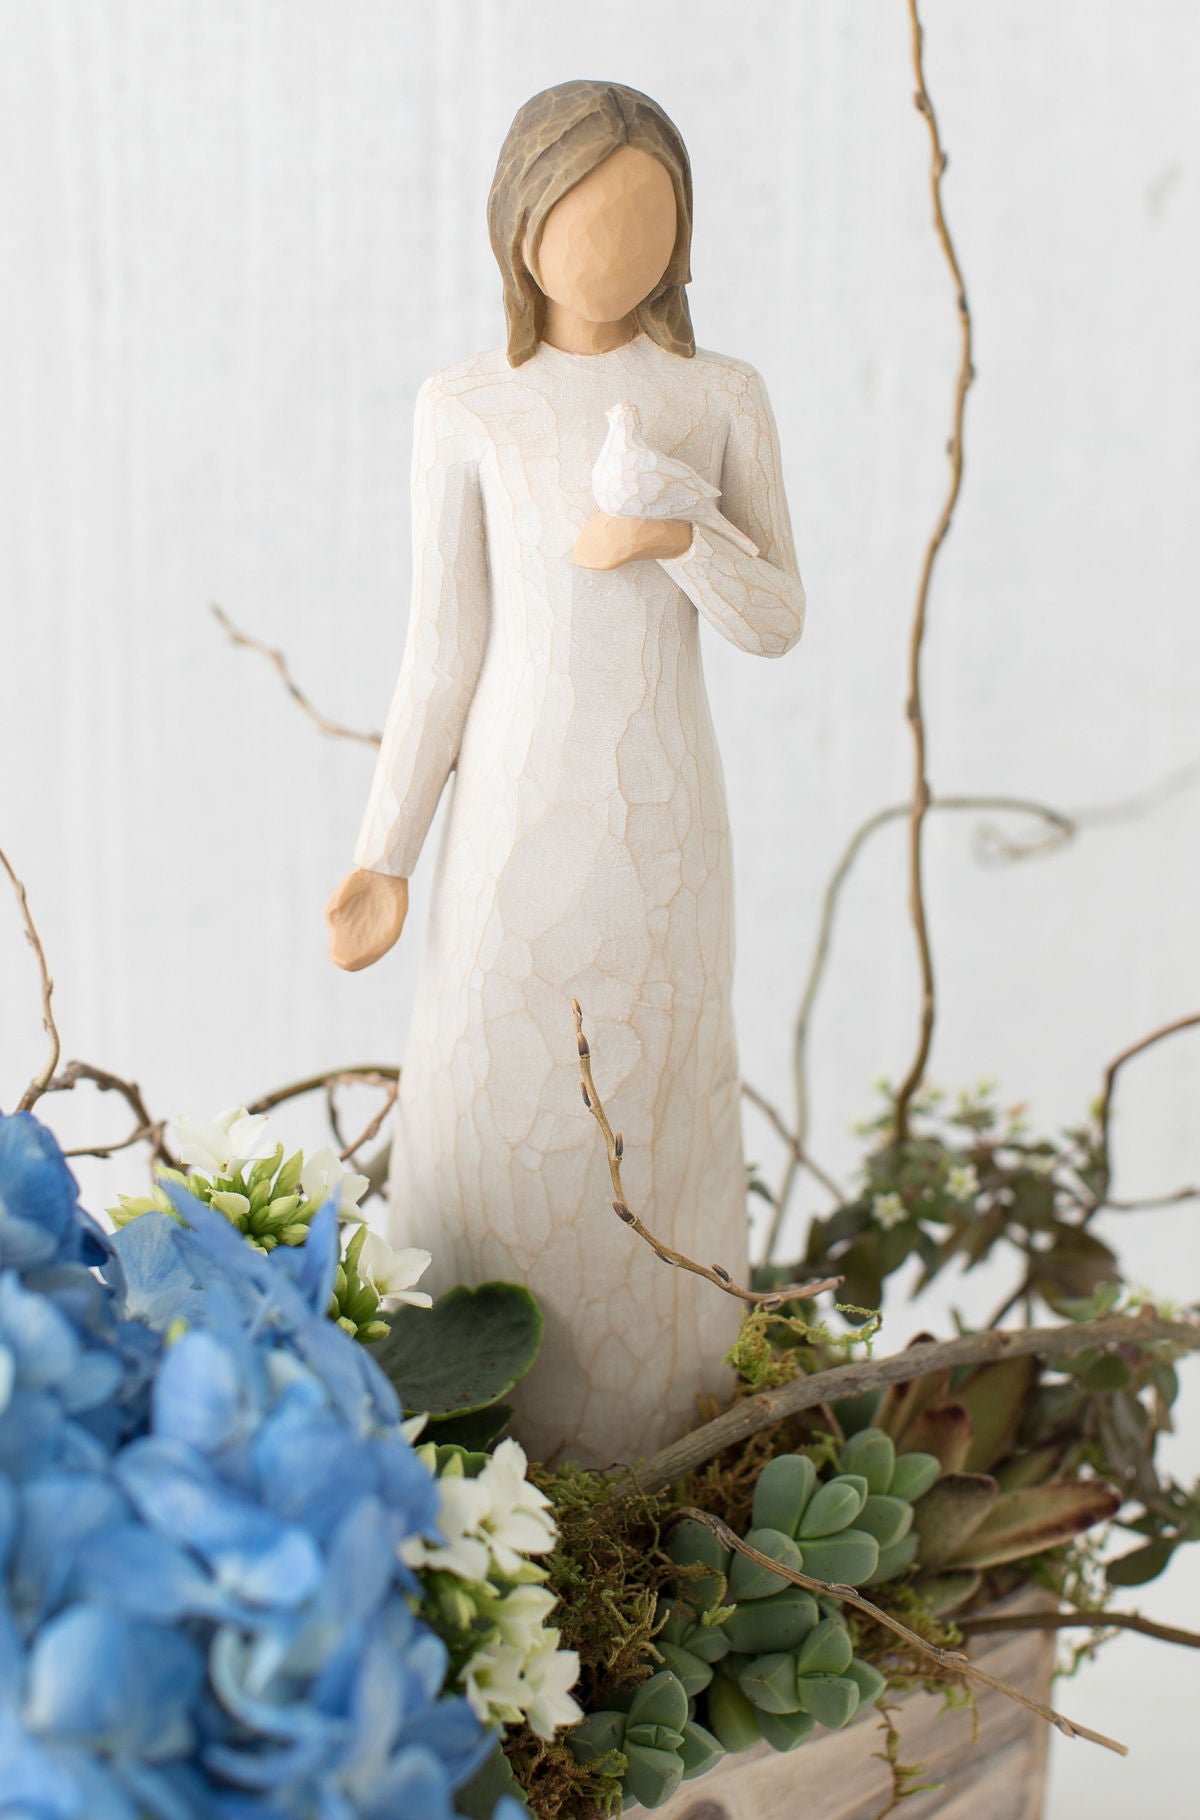 The Shabby Shed - Willow Tree Figurines - With Sympathy